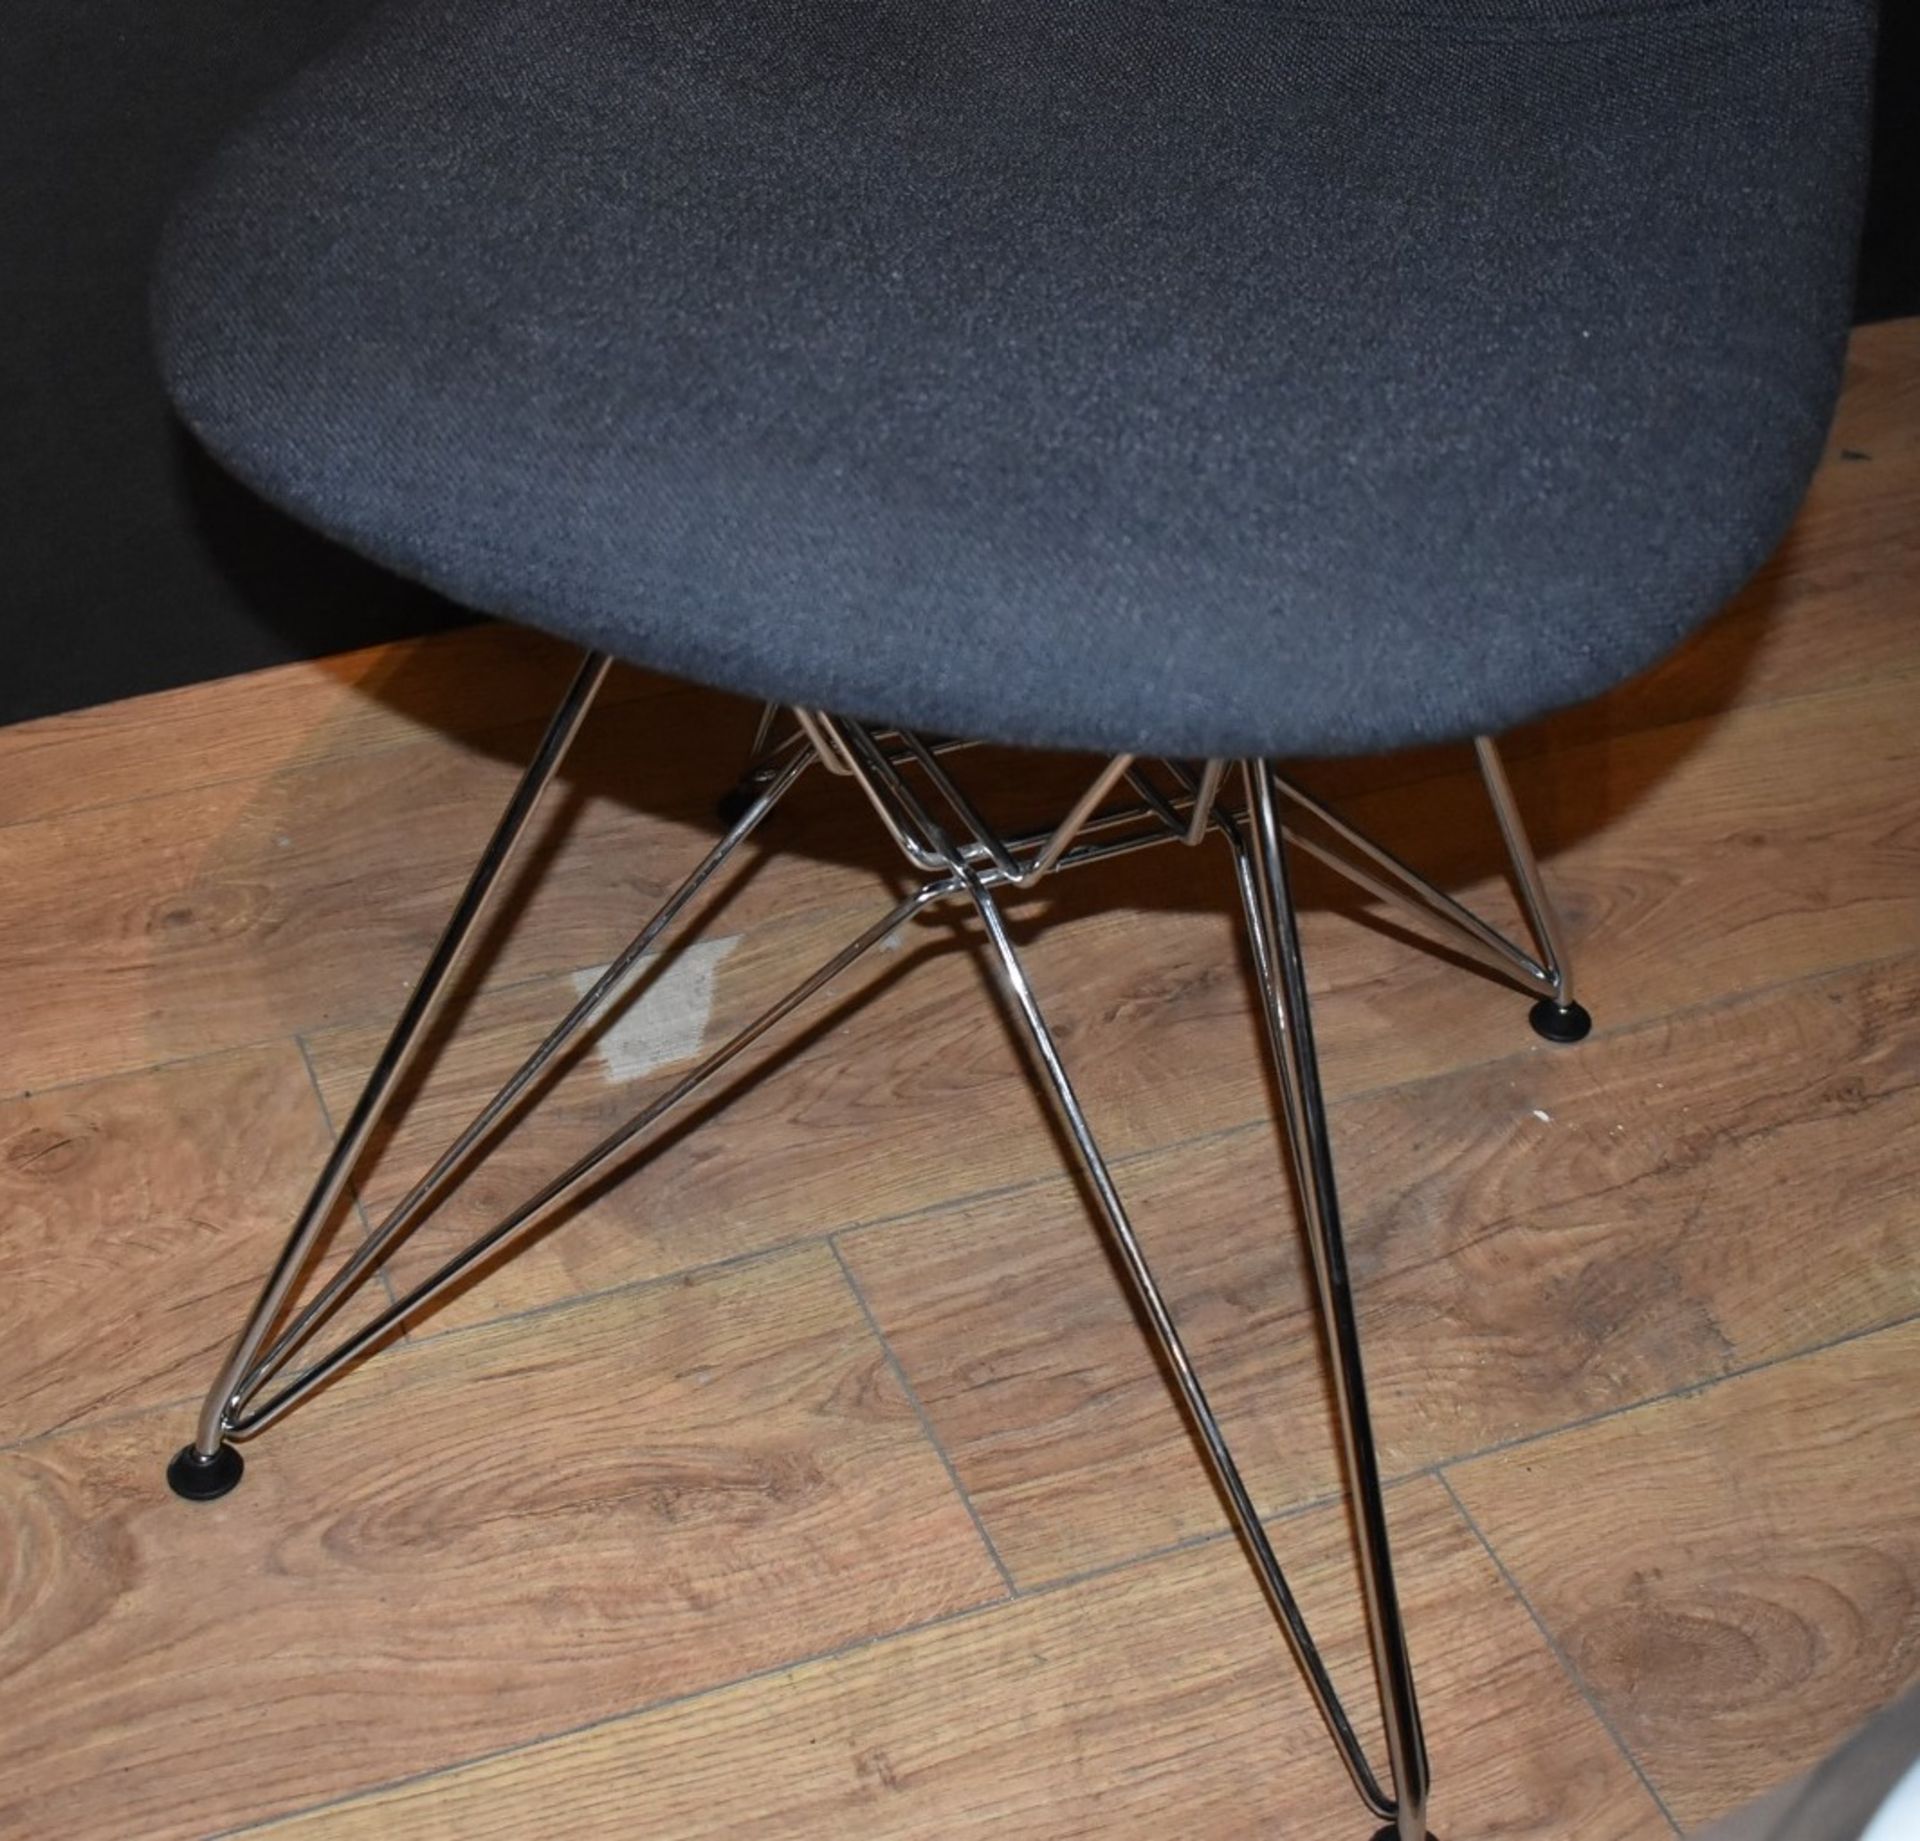 6 x Eames Inspired Eiffel Dining Chairs - Charcoal Fabric Seats With Chrome Bases - New and Unused - - Image 6 of 6